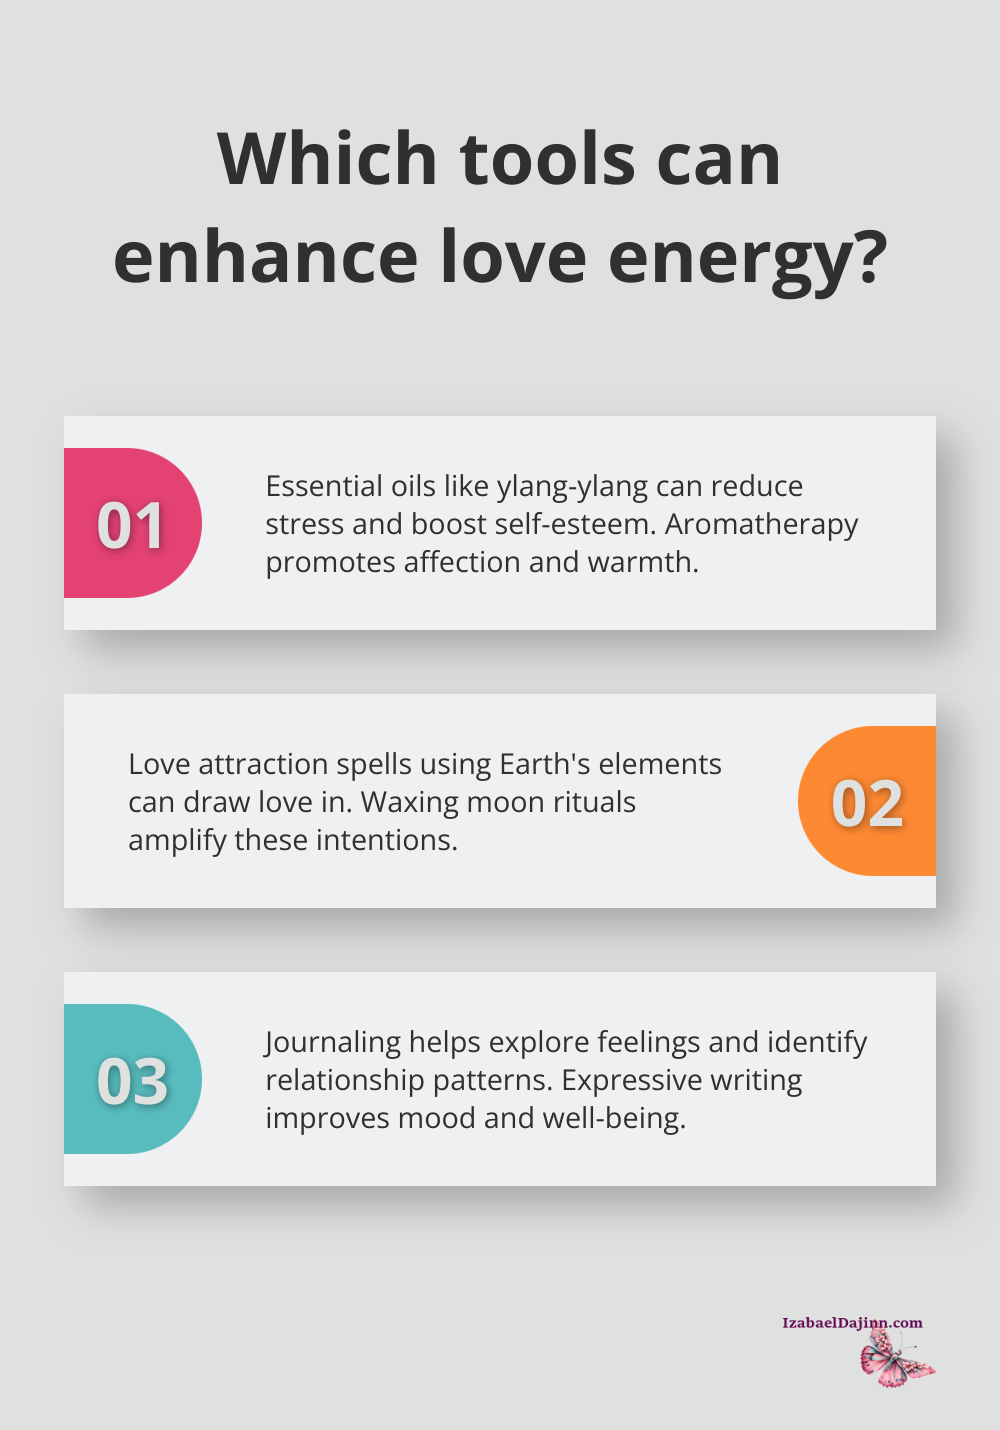 Fact - Which tools can enhance love energy?